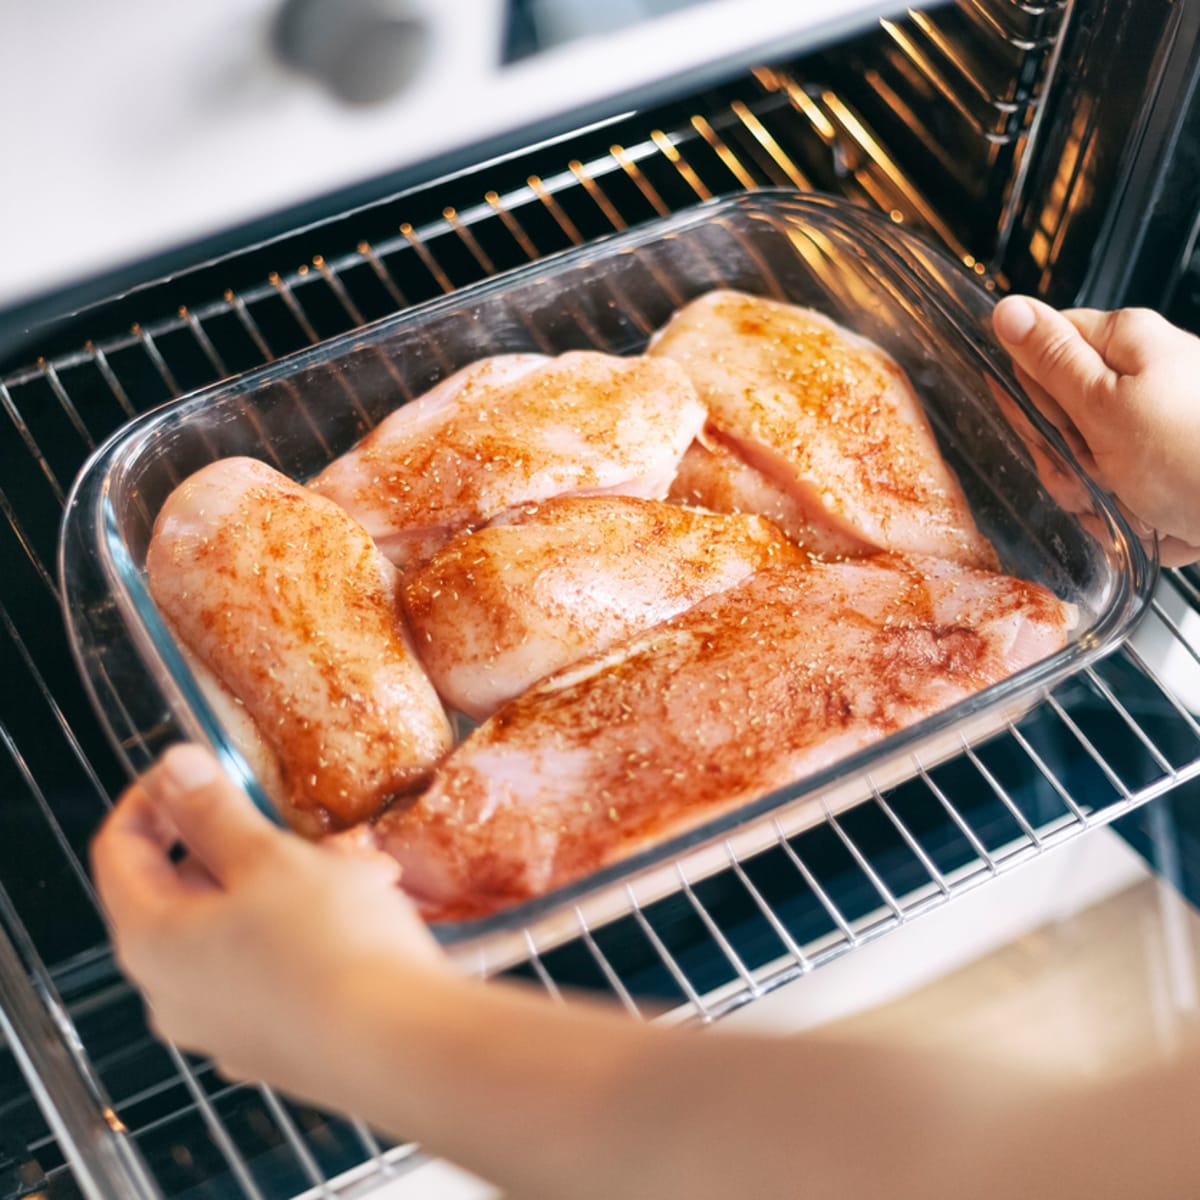 Improve Your Chicken Breasts - Learn To Cook